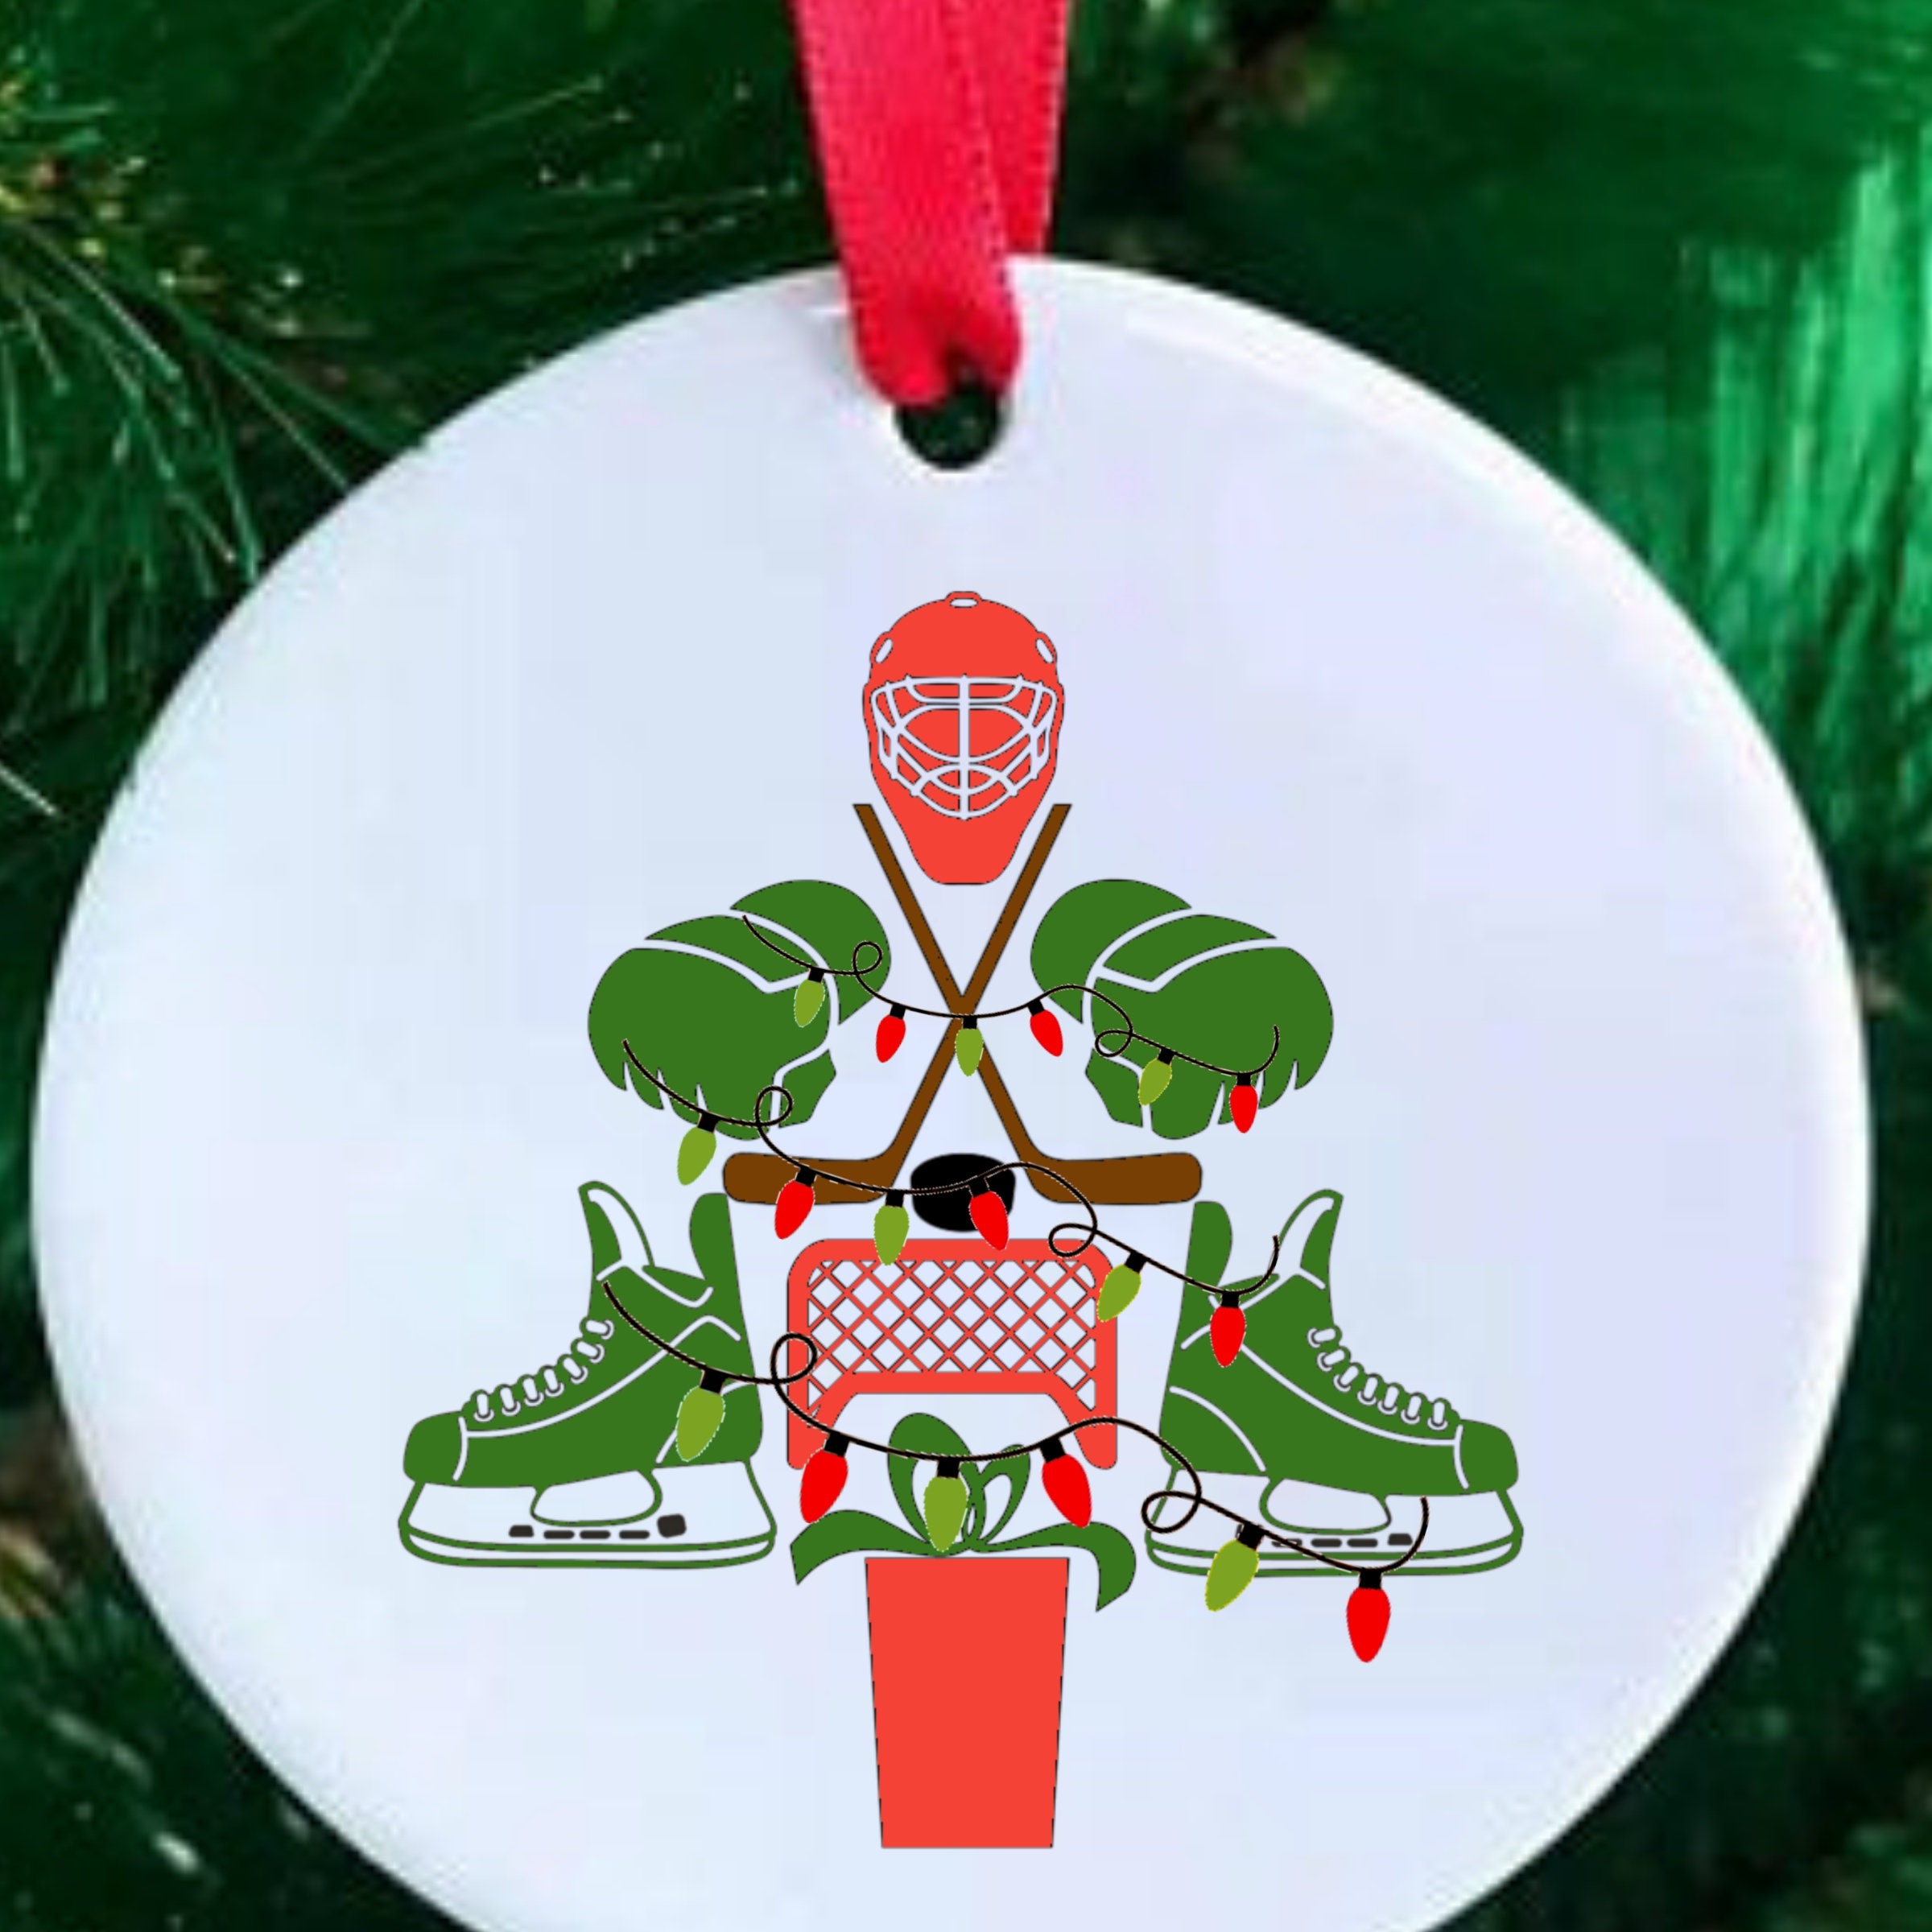 What a Fun Ice Hockey Christmas Decal Use This Digital SVG File to Show